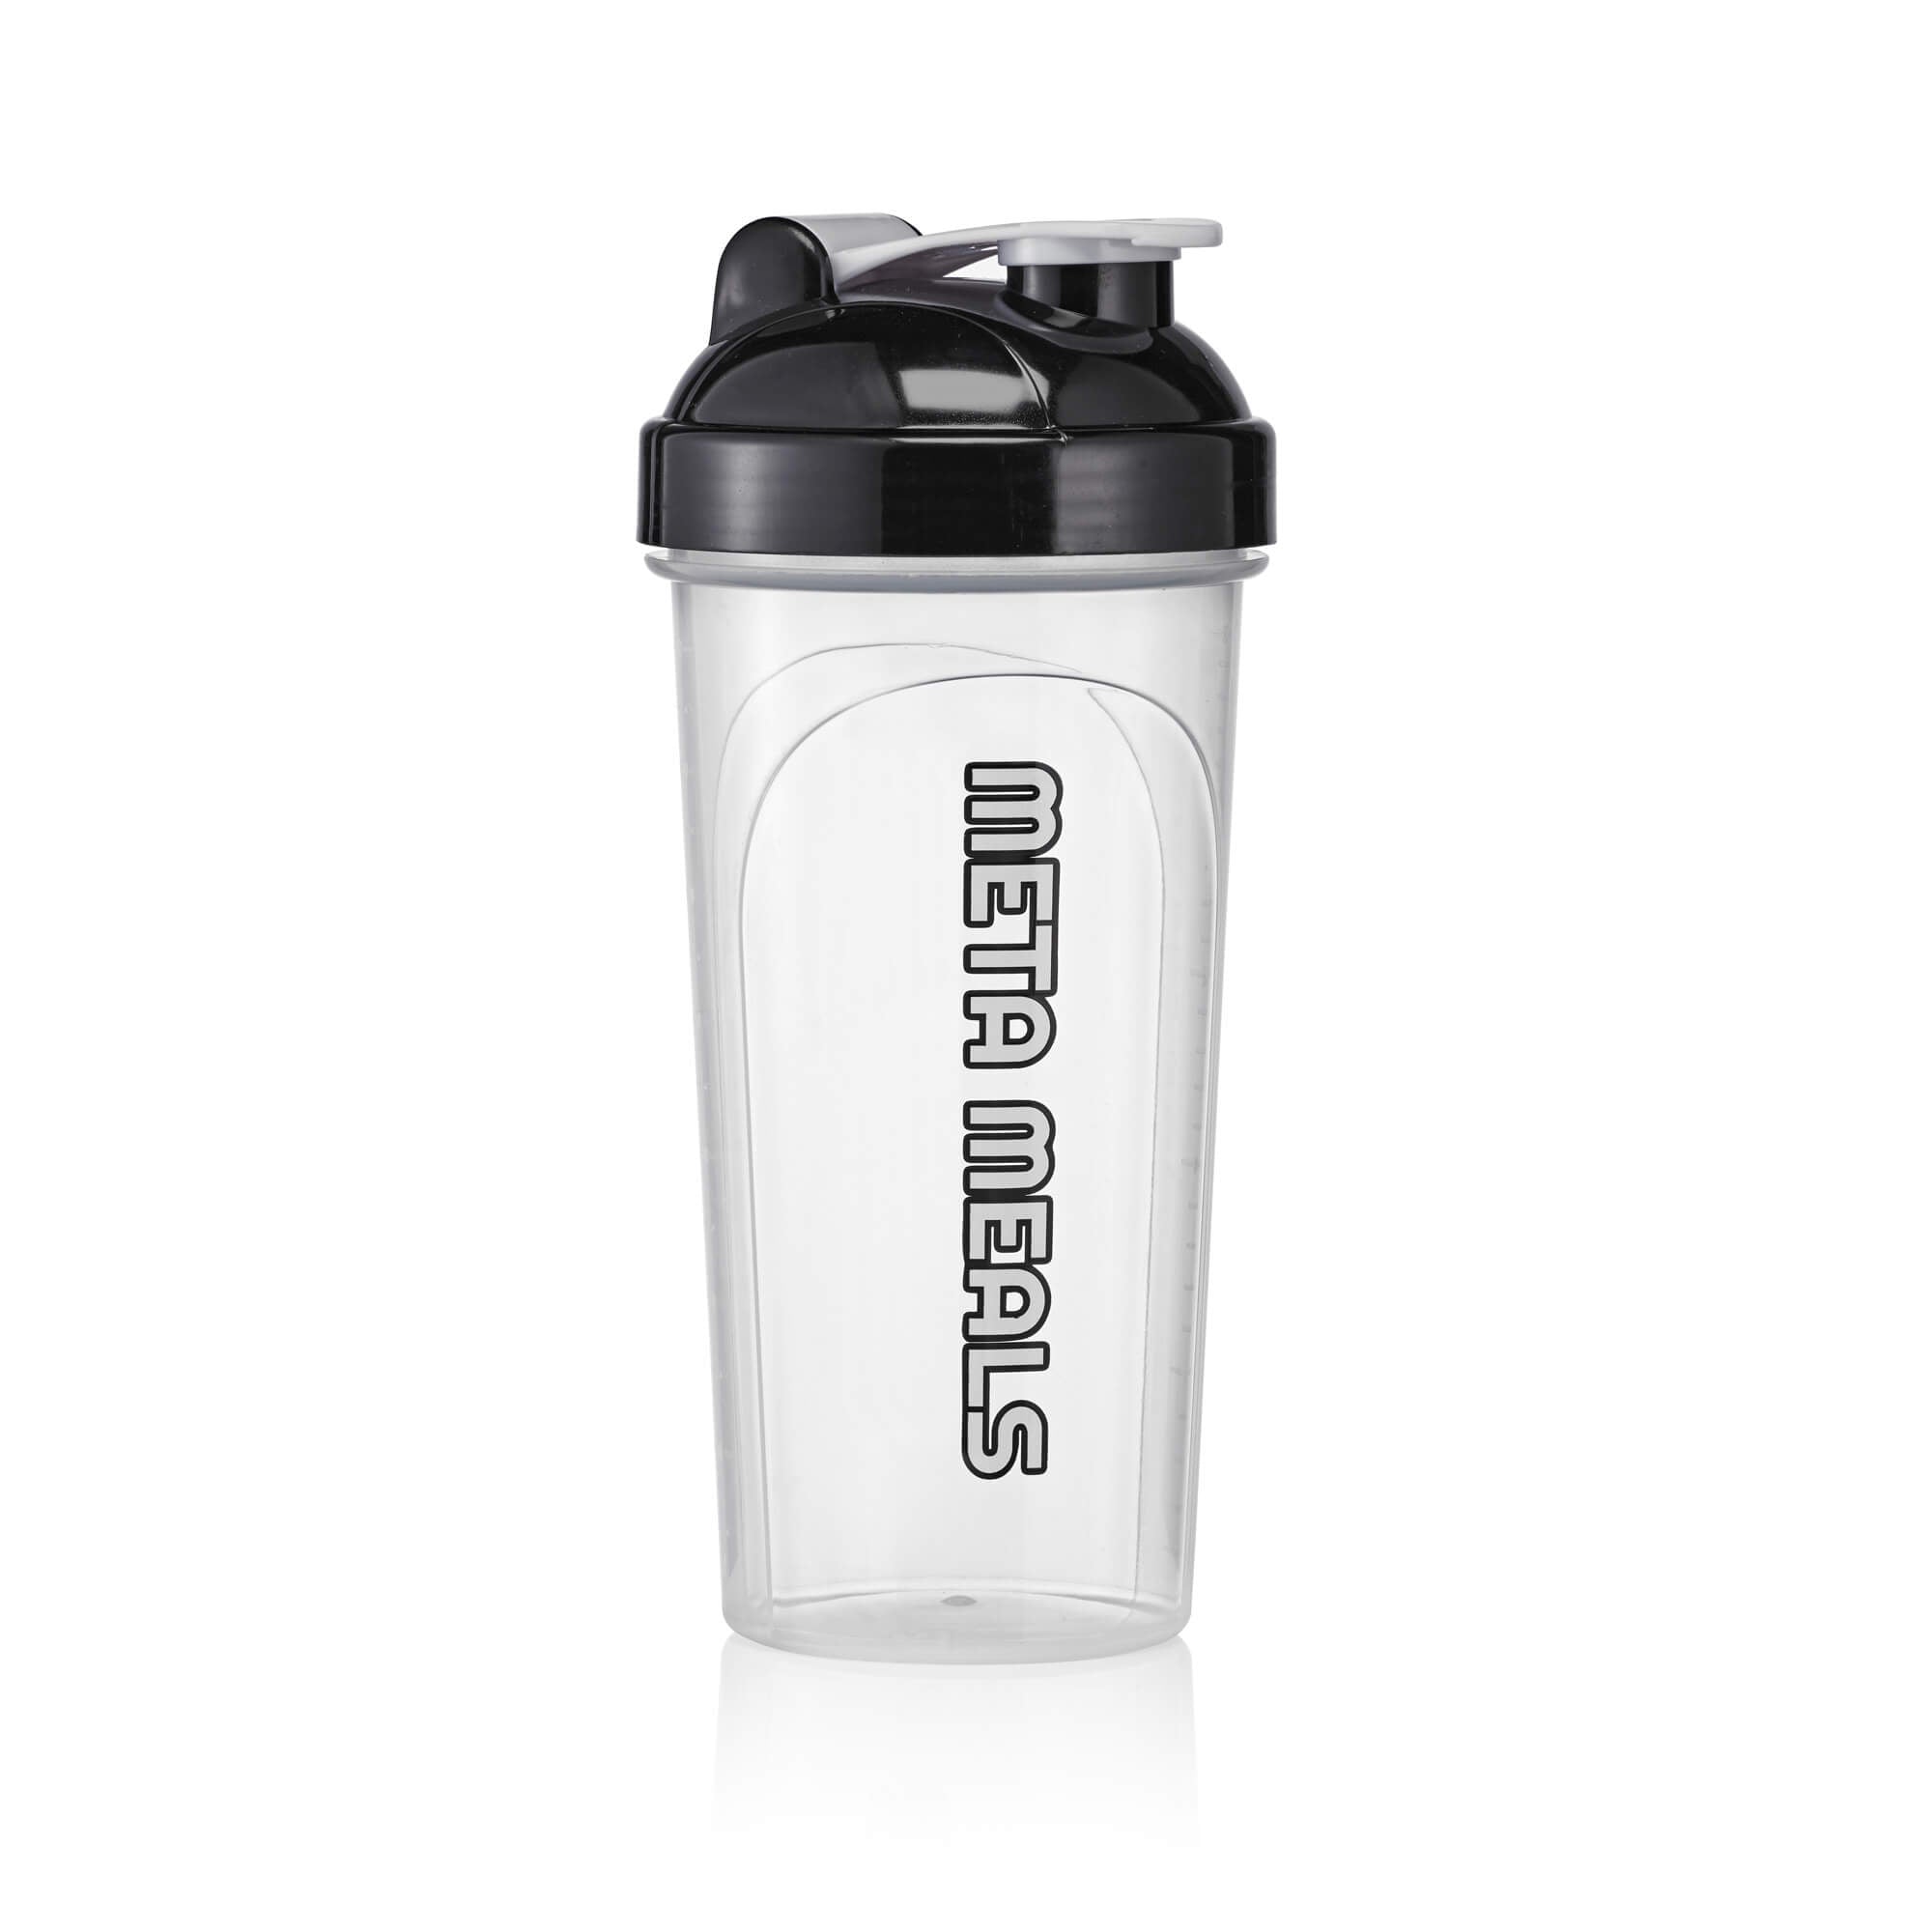 Meta Meals clear shaker bottle for protein and meal replacement powder shakes